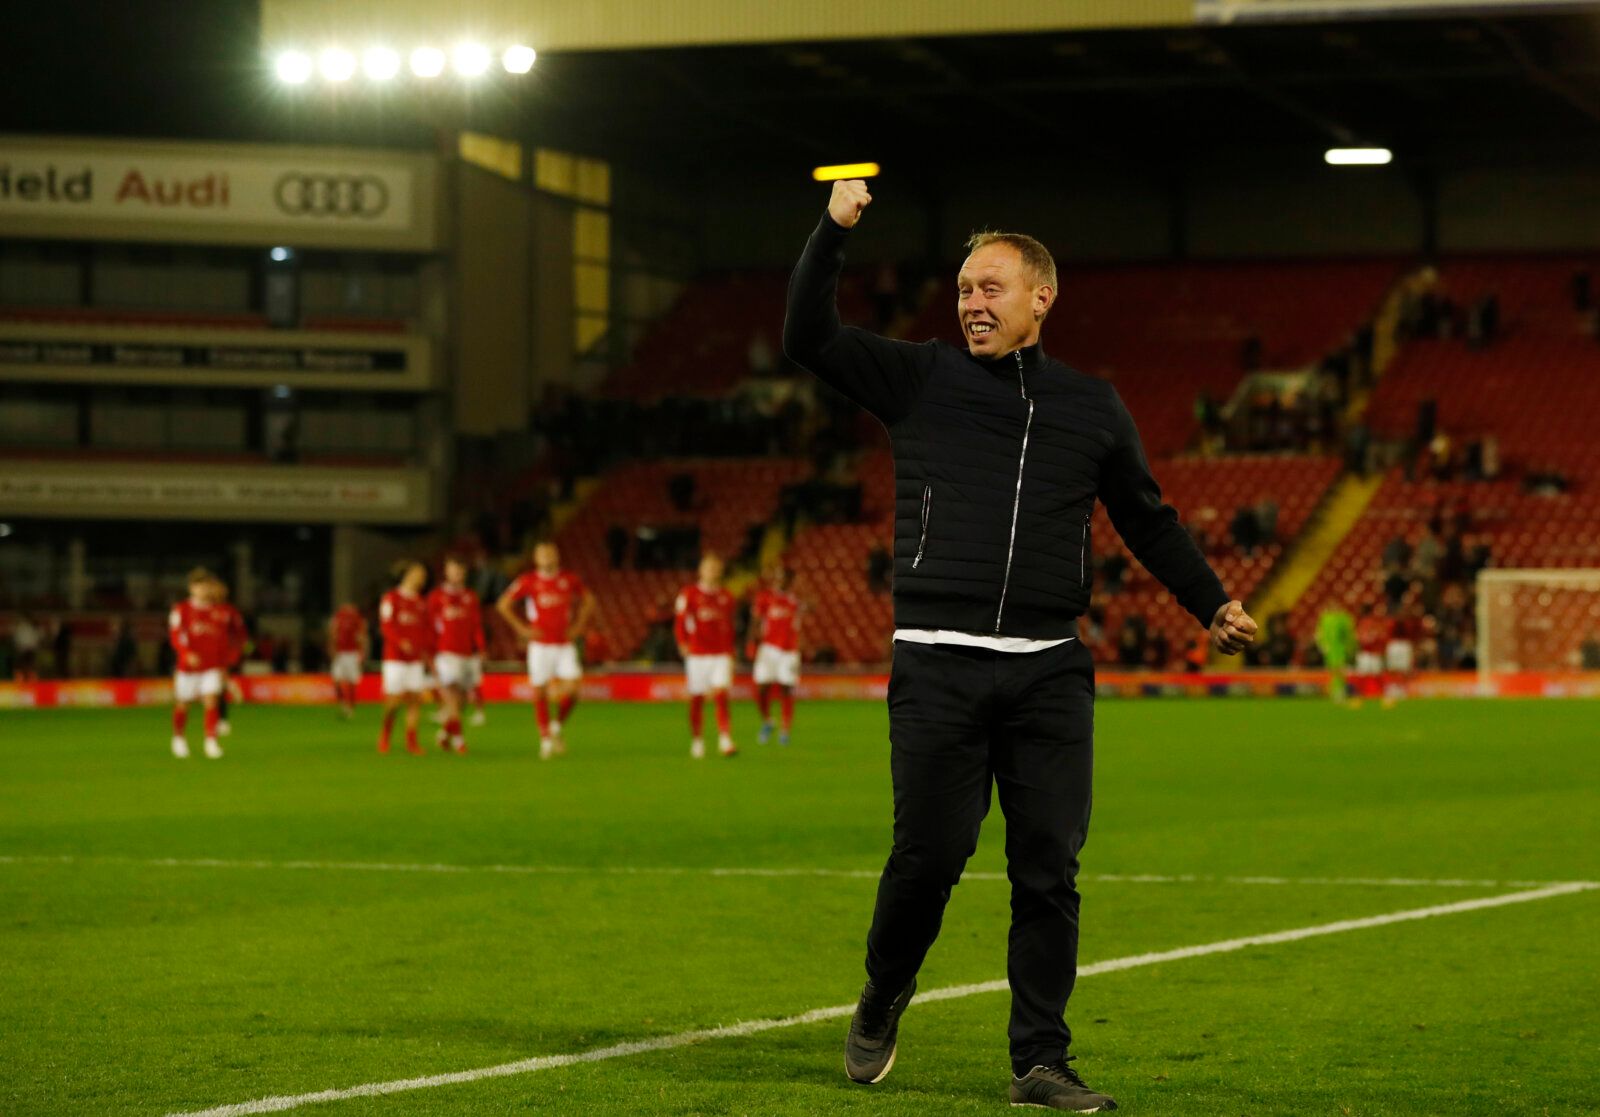 Soccer Football - Championship - Barnsley v Nottingham Forest - Oakwell, Barnsley, Britain - September 29, 2021 Nottingham Forest manager Steven Cooper celebrates after the match Action Images/Lee Smith EDITORIAL USE ONLY. No use with unauthorized audio, video, data, fixture lists, club/league logos or 'live' services. Online in-match use limited to 75 images, no video emulation. No use in betting, games or single club /league/player publications.  Please contact your account representative for 